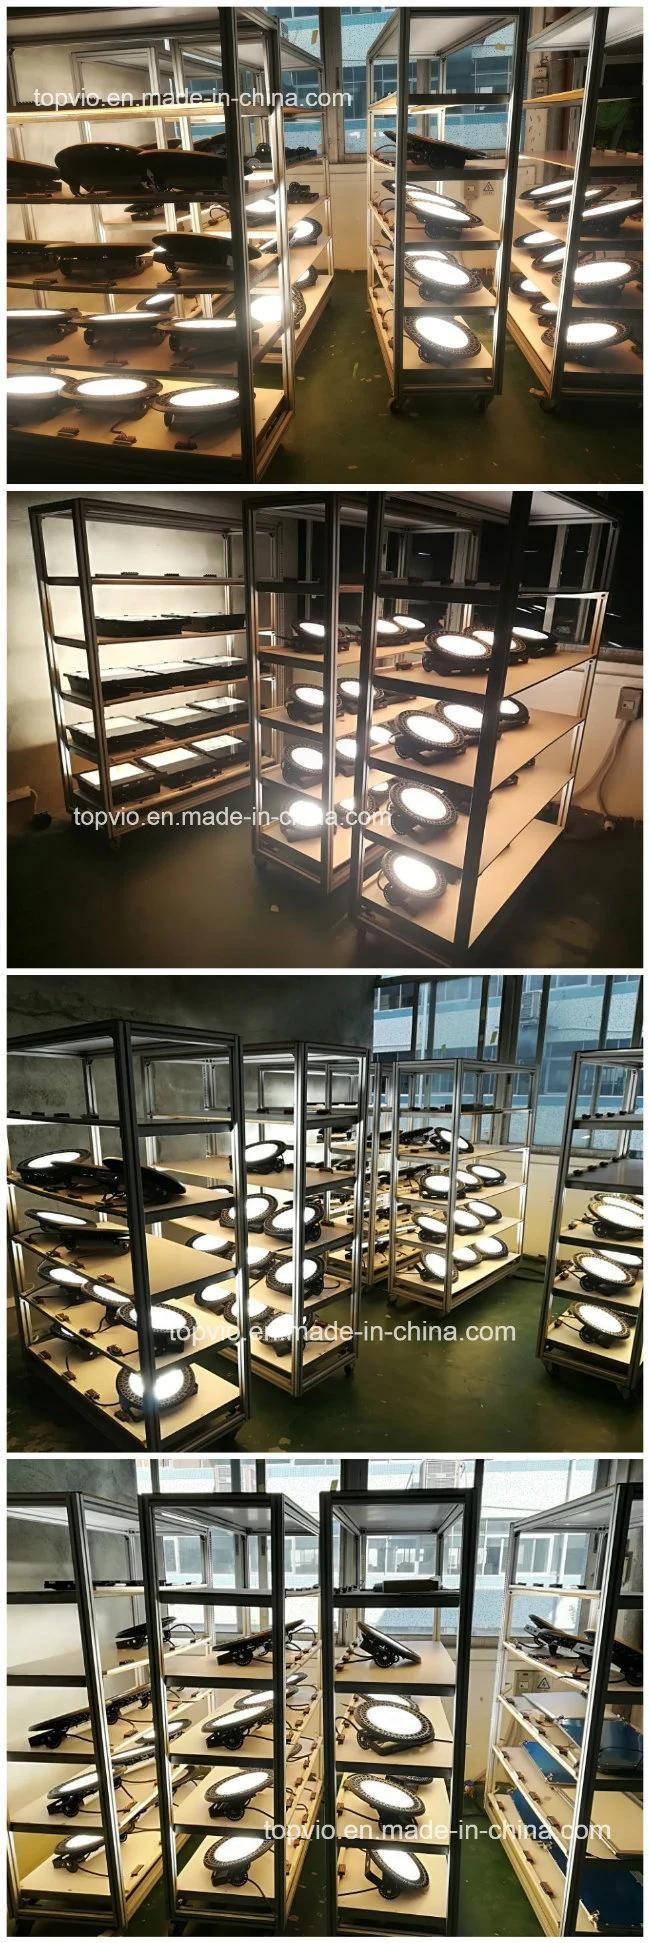 High Quality Products Industrial Lighting LED High Bay